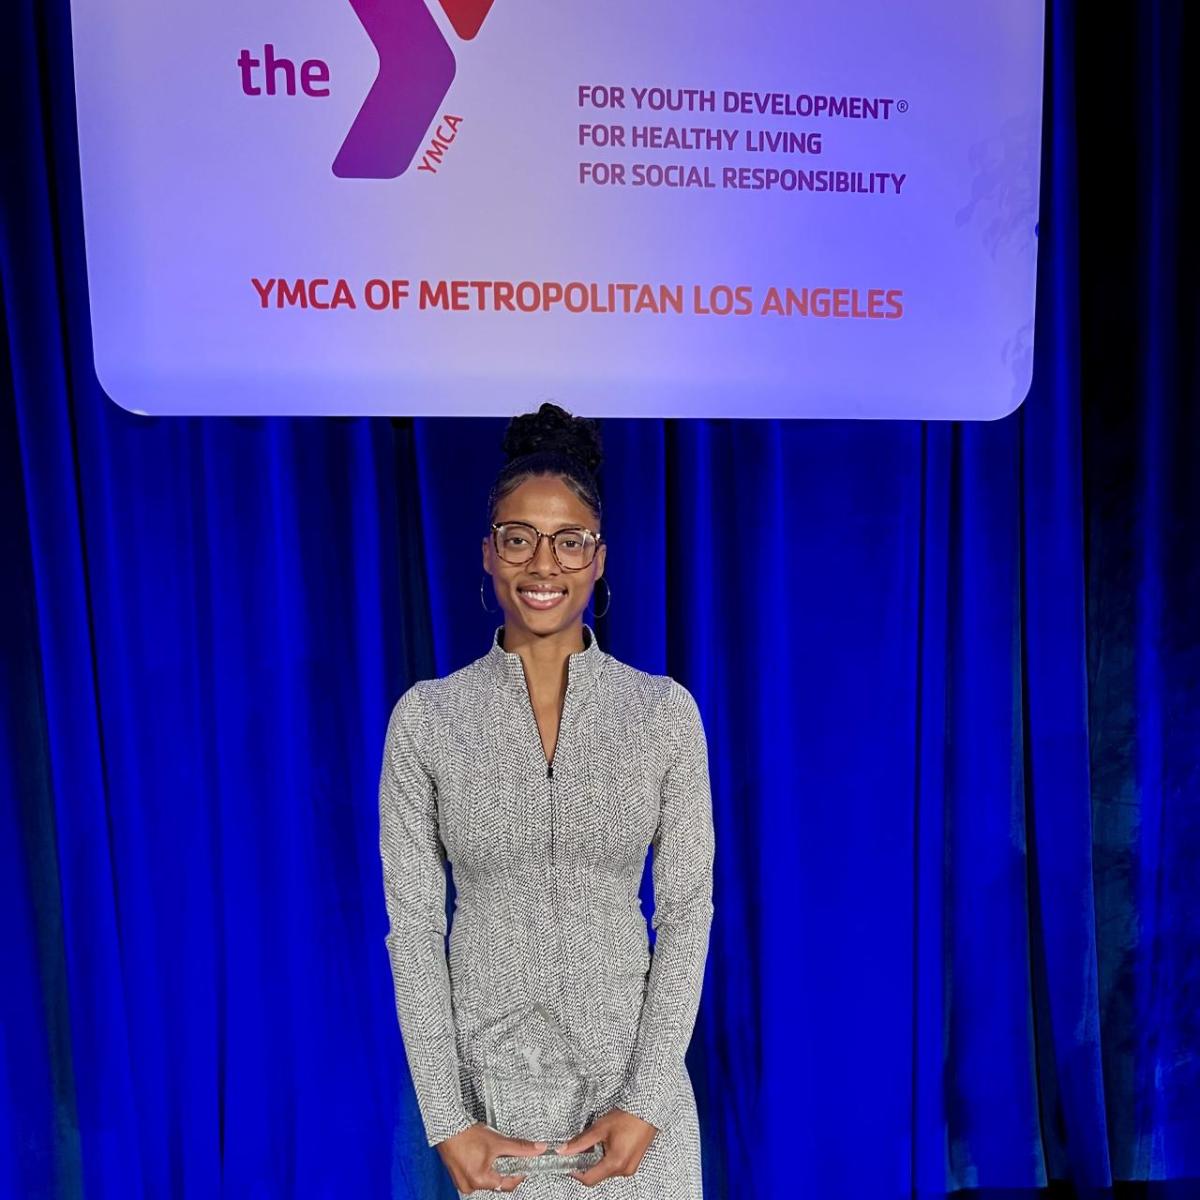 LA Kings Blake Bolden honored by YMCA of Metropolitan Los Angeles with 2023 Human Dignity Award at 52nd Annual Martin Luther King, Jr. Brotherhood Breakfast.